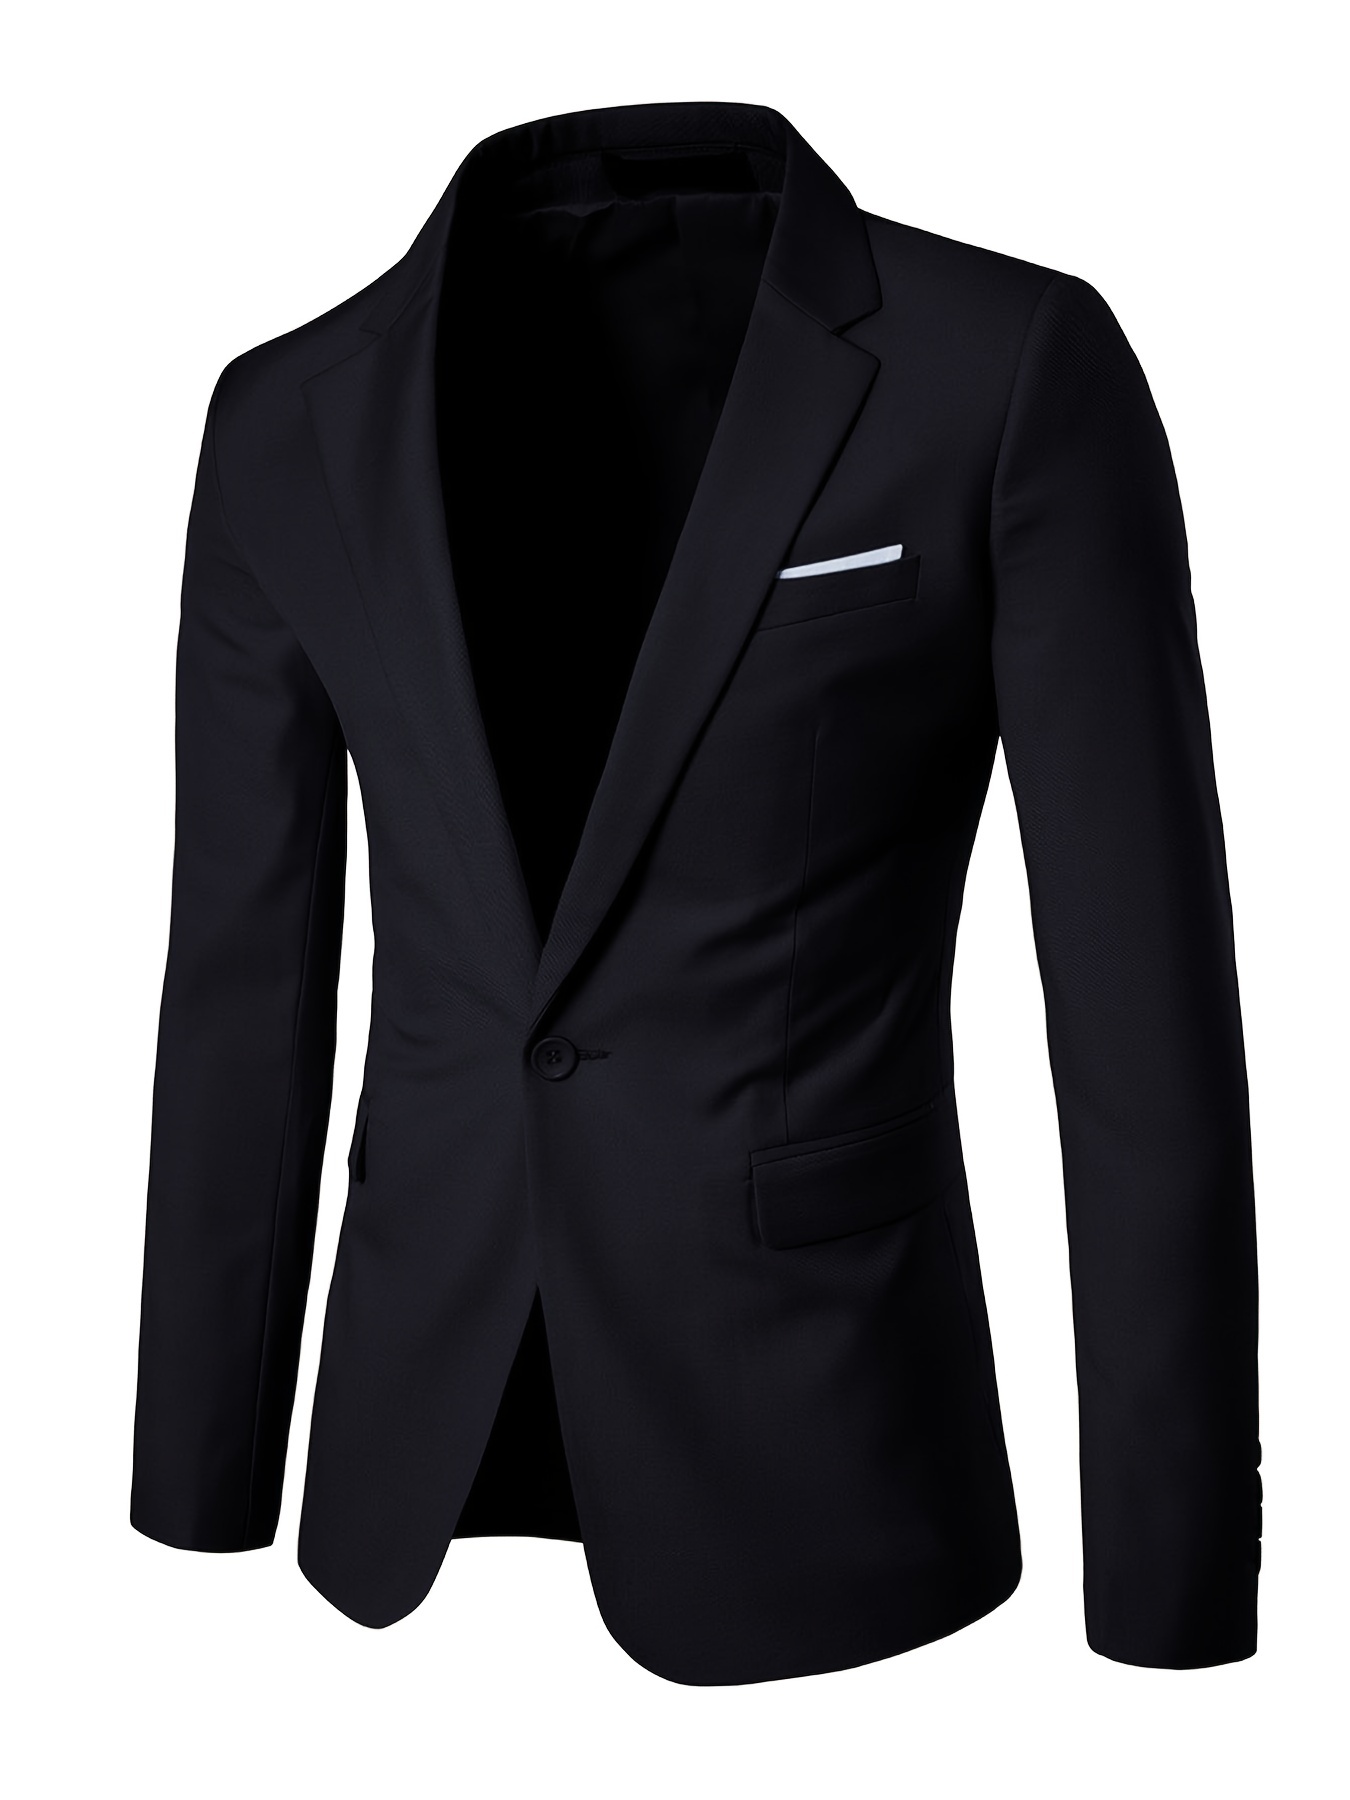 Mens Slim Classic Suit Jacket One Button Casual Sports Jackets Coat